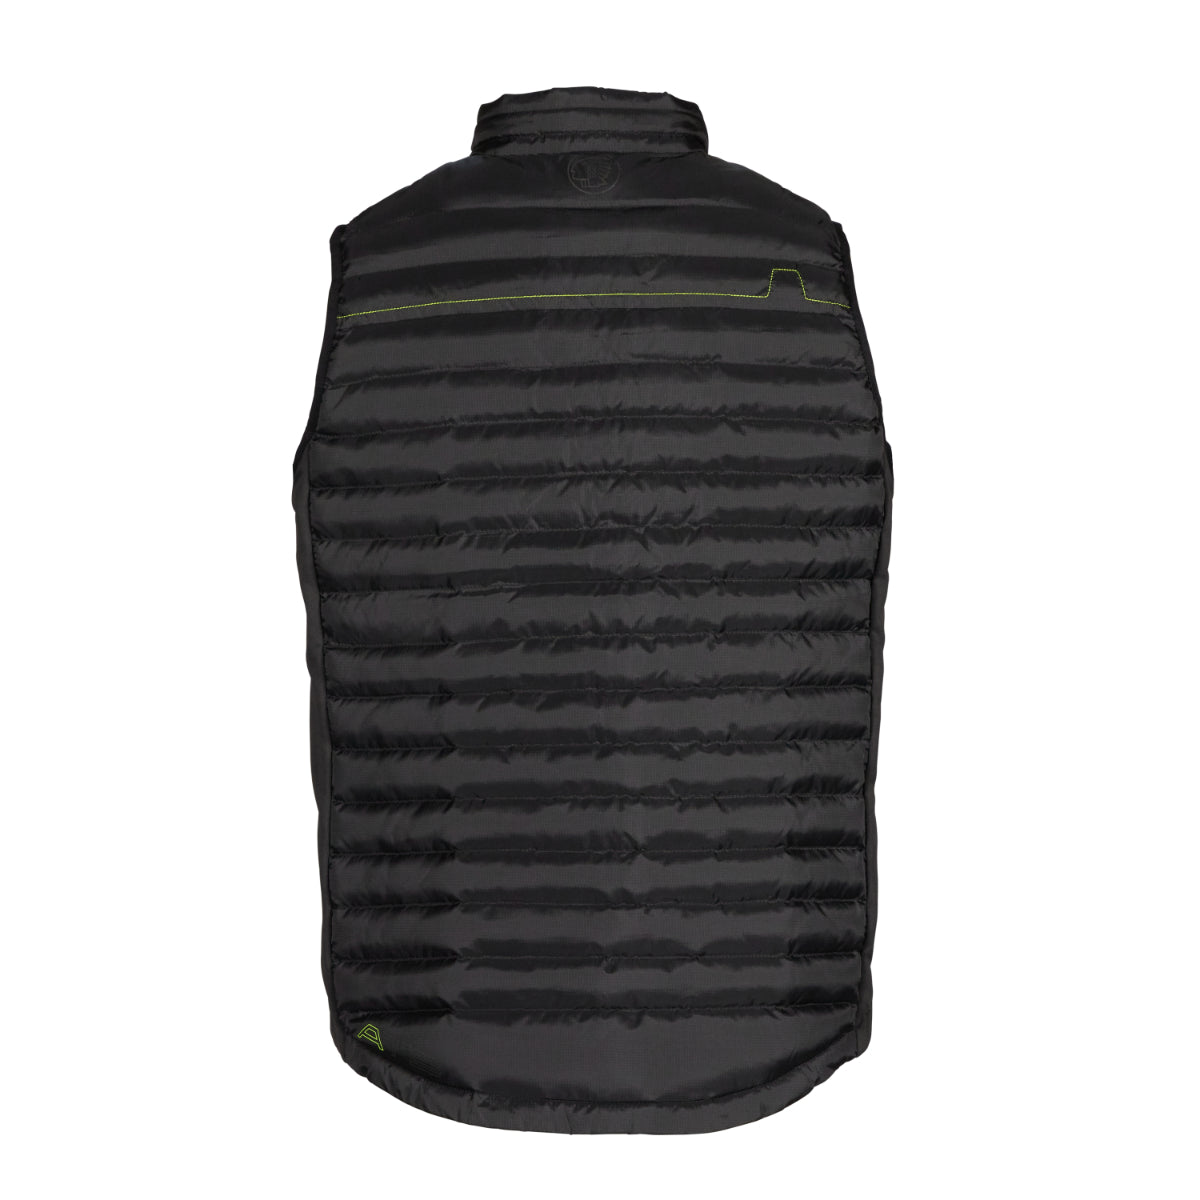 Apache Stretch Gilet with recycled polyester baffles